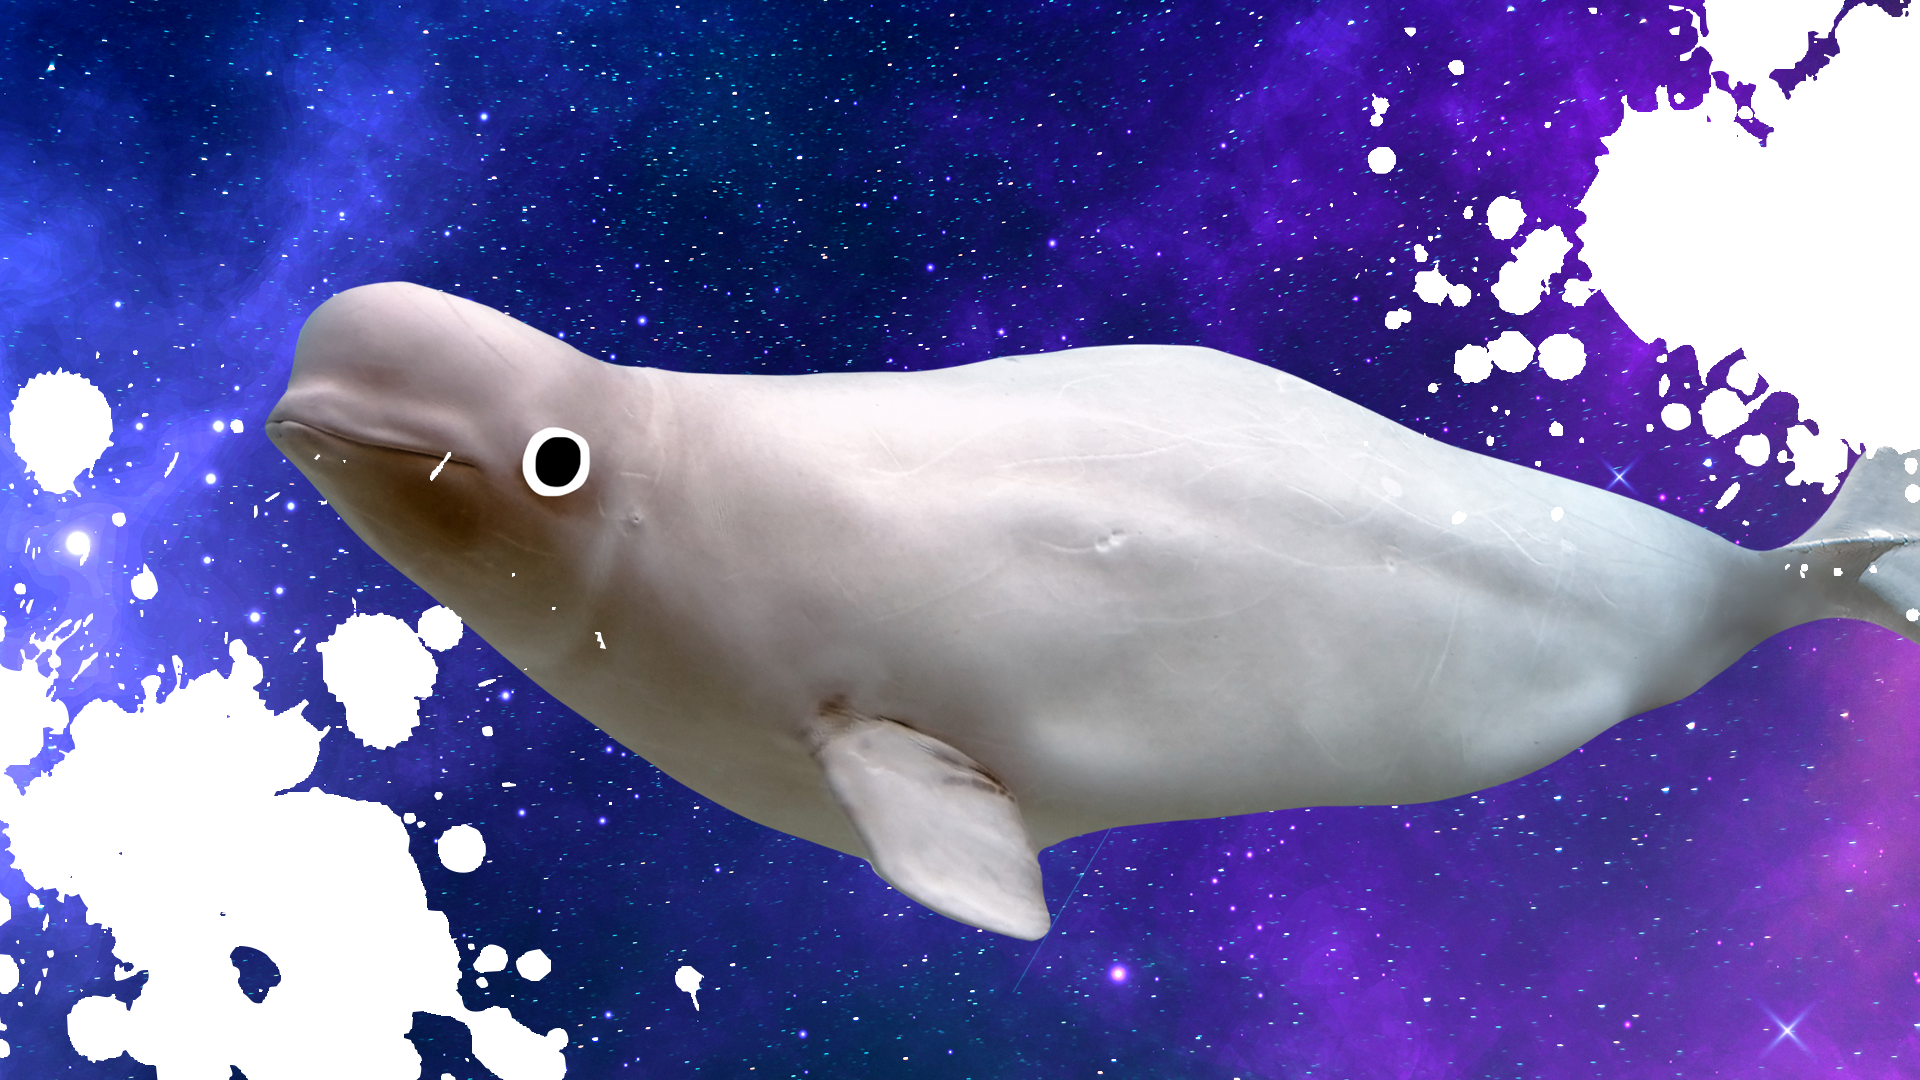 Belgua whale in space with splats